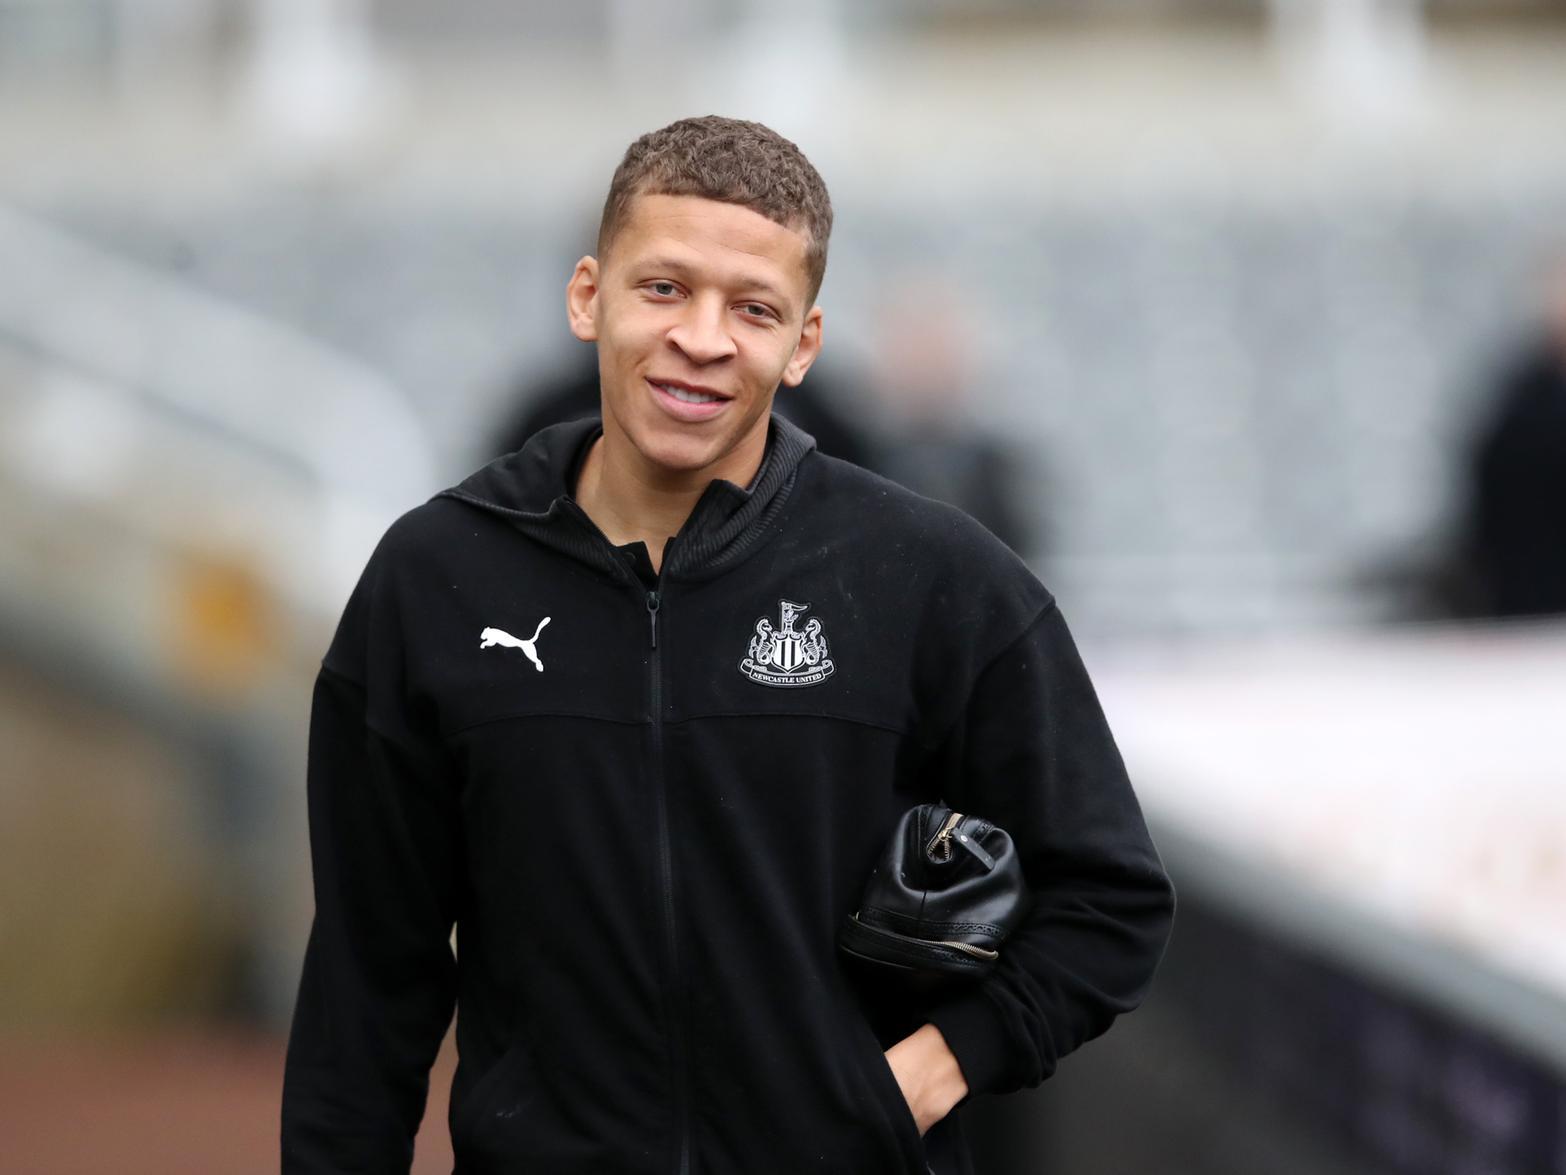 Preston North End have been linked with a move for Newcastle United striker Dwight Gayle. (Lancashire Post)